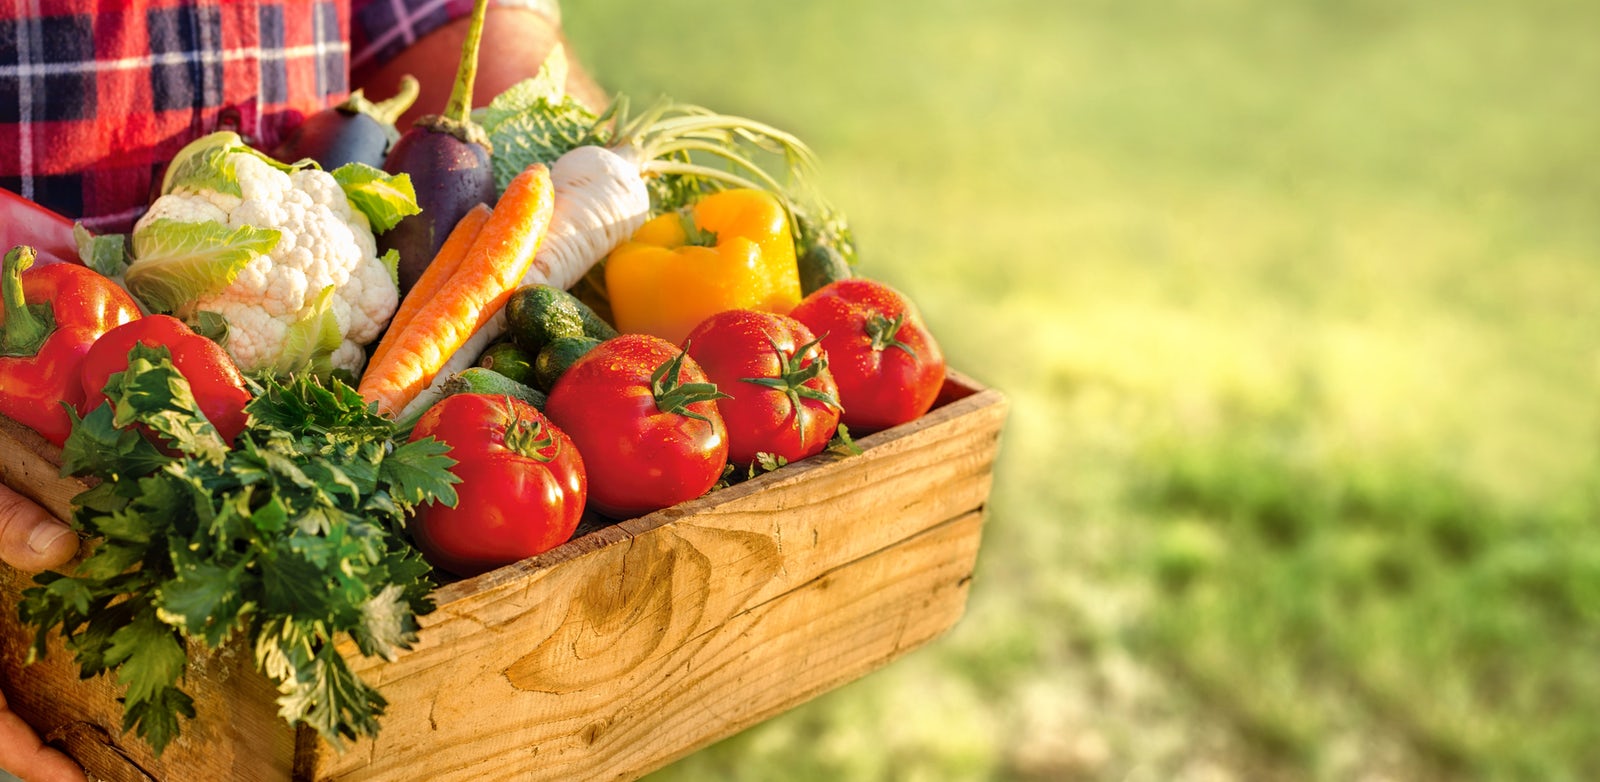 Where to find the organic food in Serbia